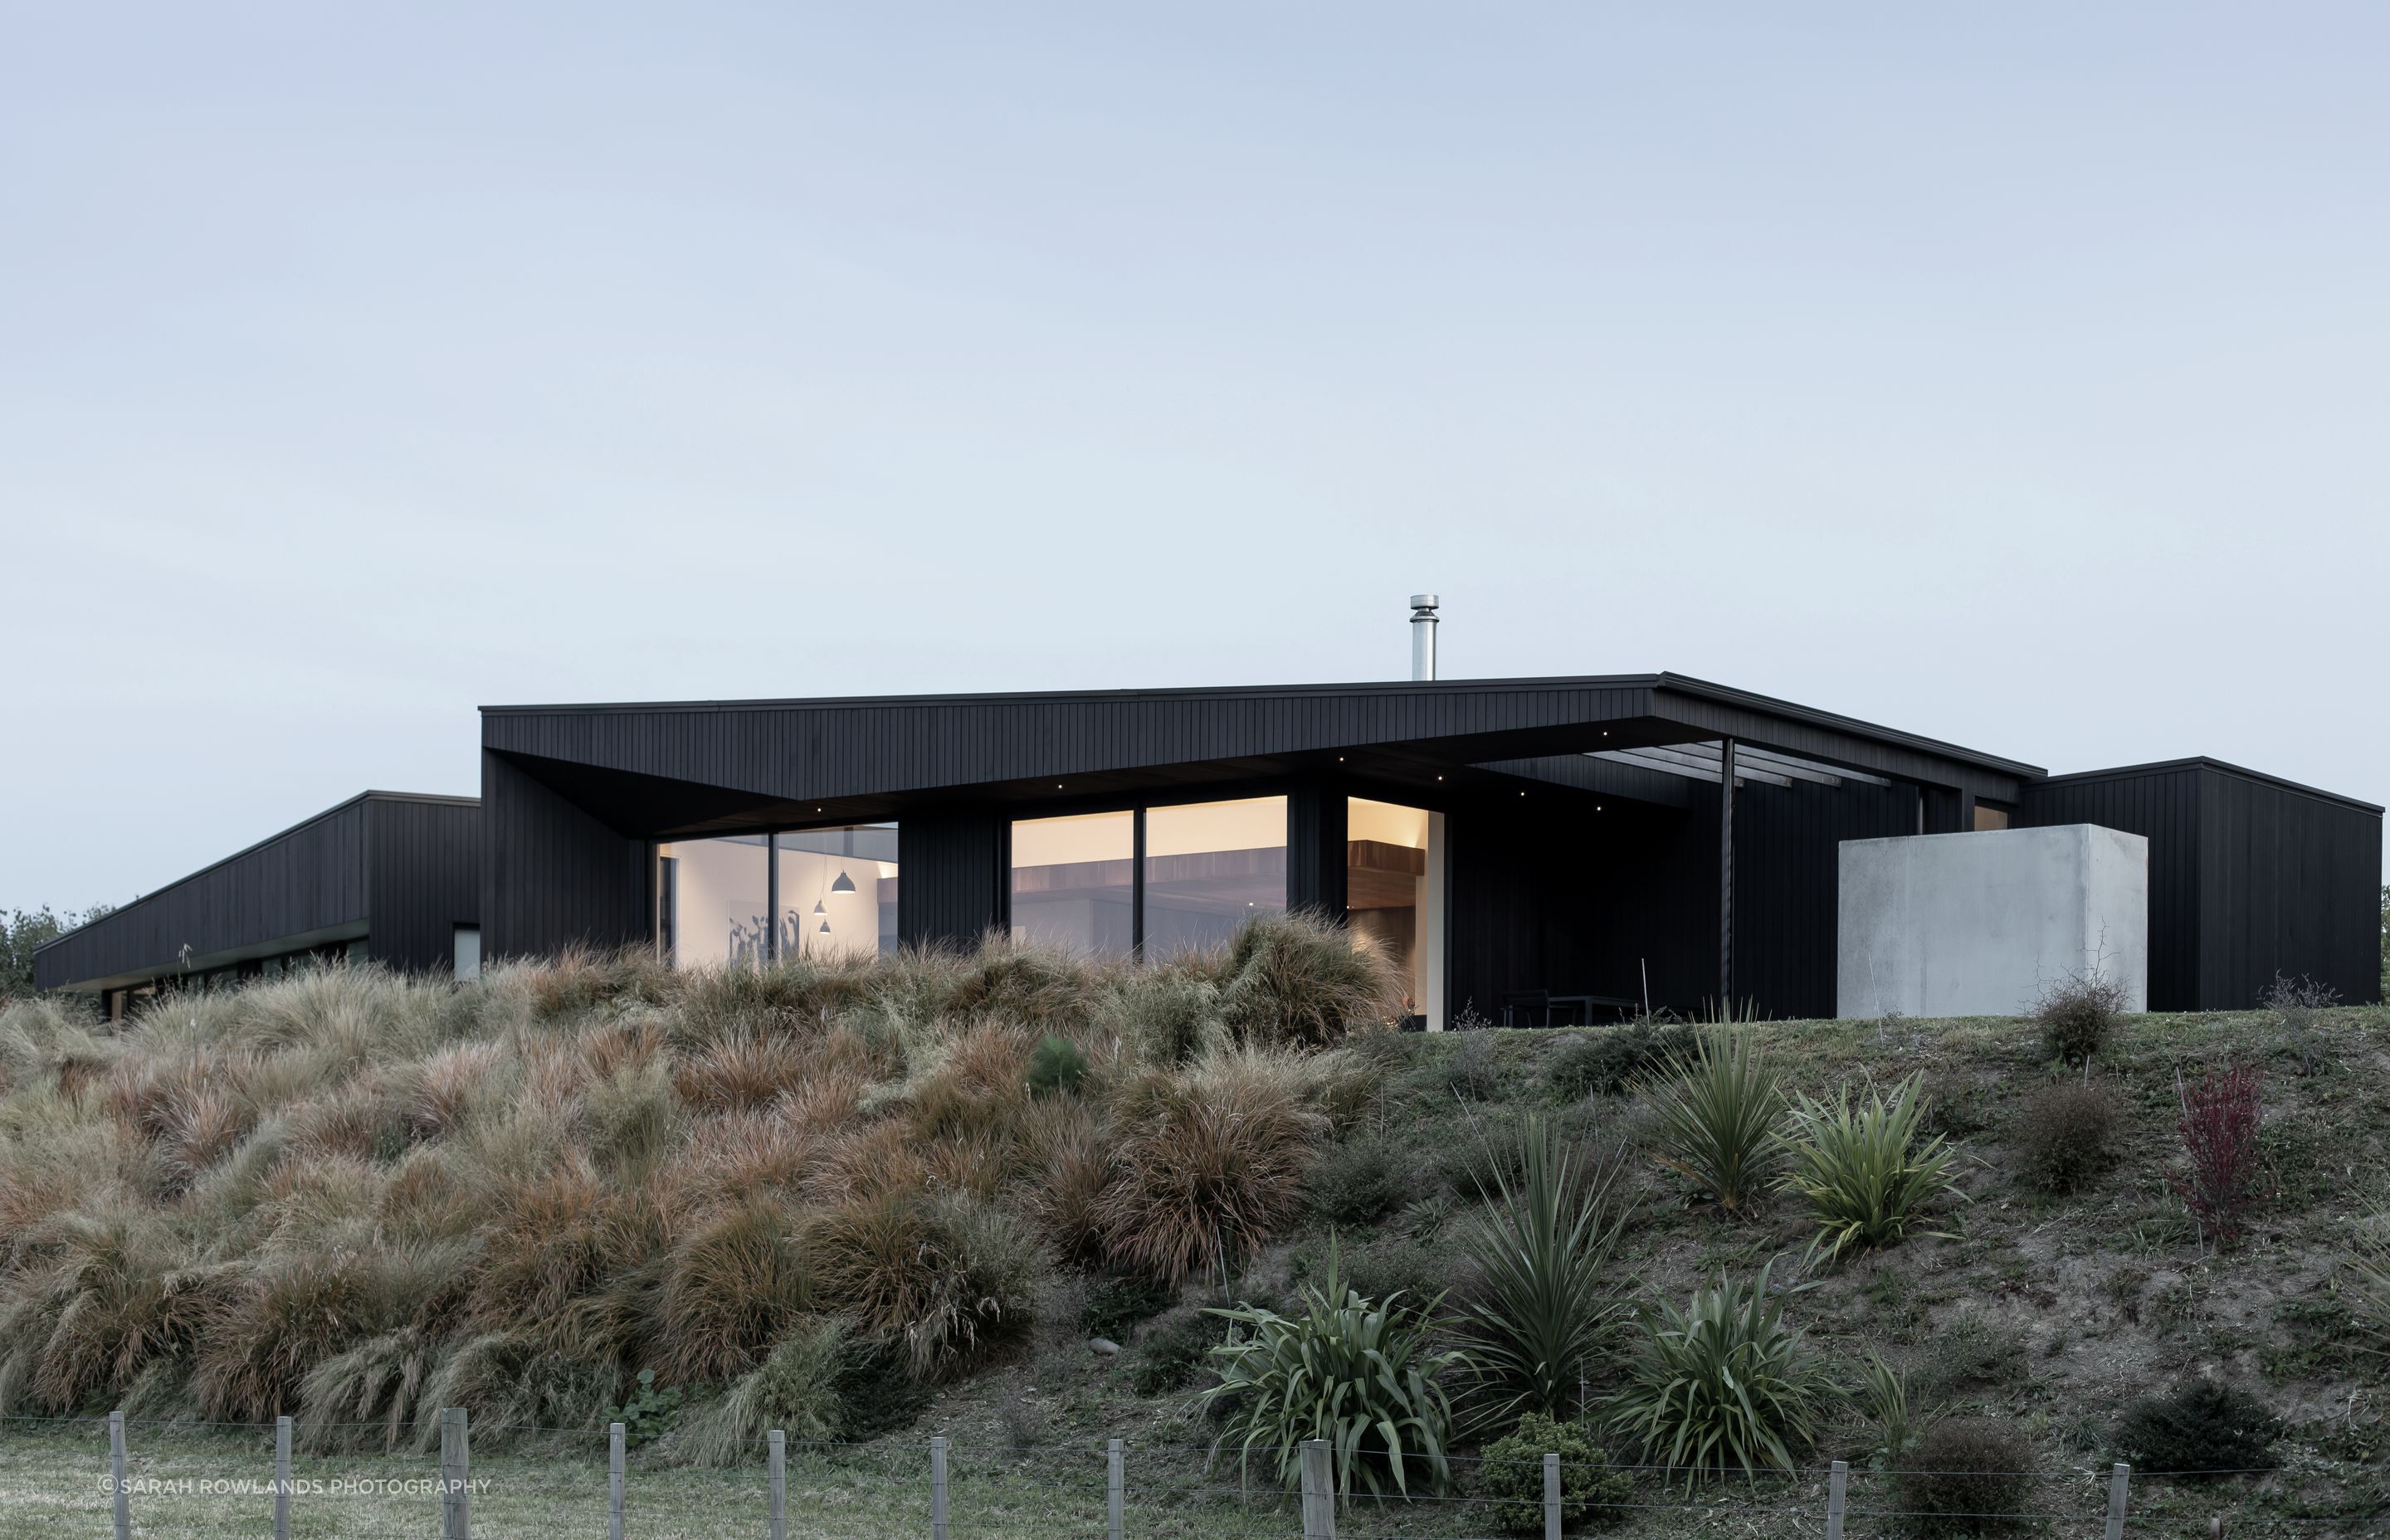 Sited within an existing vineyard, this contemporary new home comprises a riven sculptural element set low within the landscape.